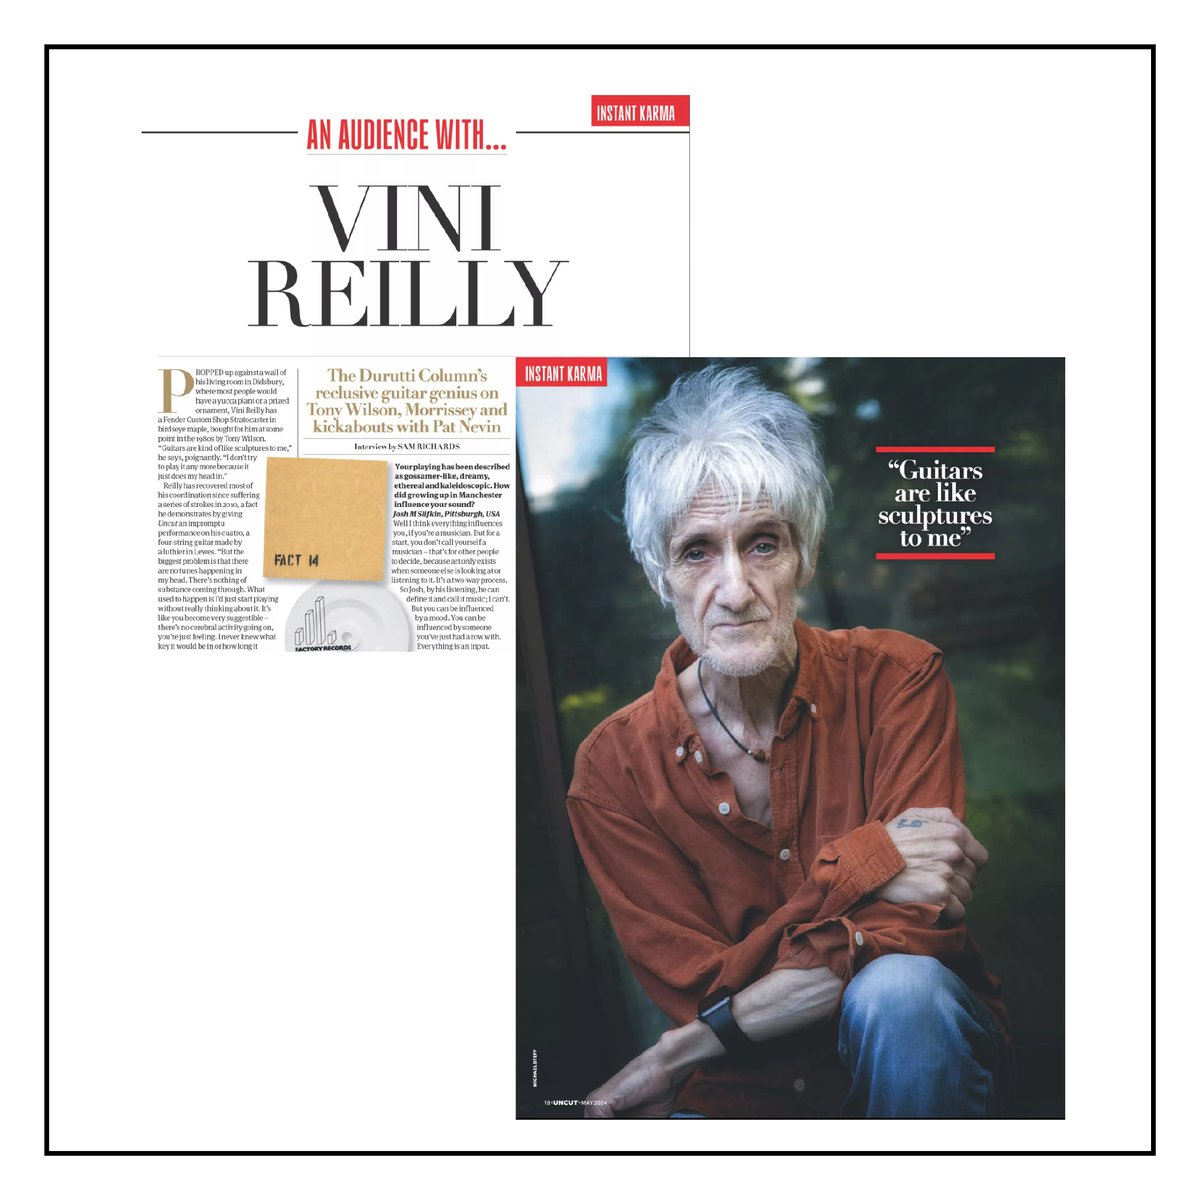 An Audience with #ViniReilly is featured in the latest edition of @uncutmagazine. It's a great read & available to buy from all good newsagents or online here: shop.kelsey.co.uk/single-issue/u… Thanks to everyone who submitted a question. Did your question make it into the feature?